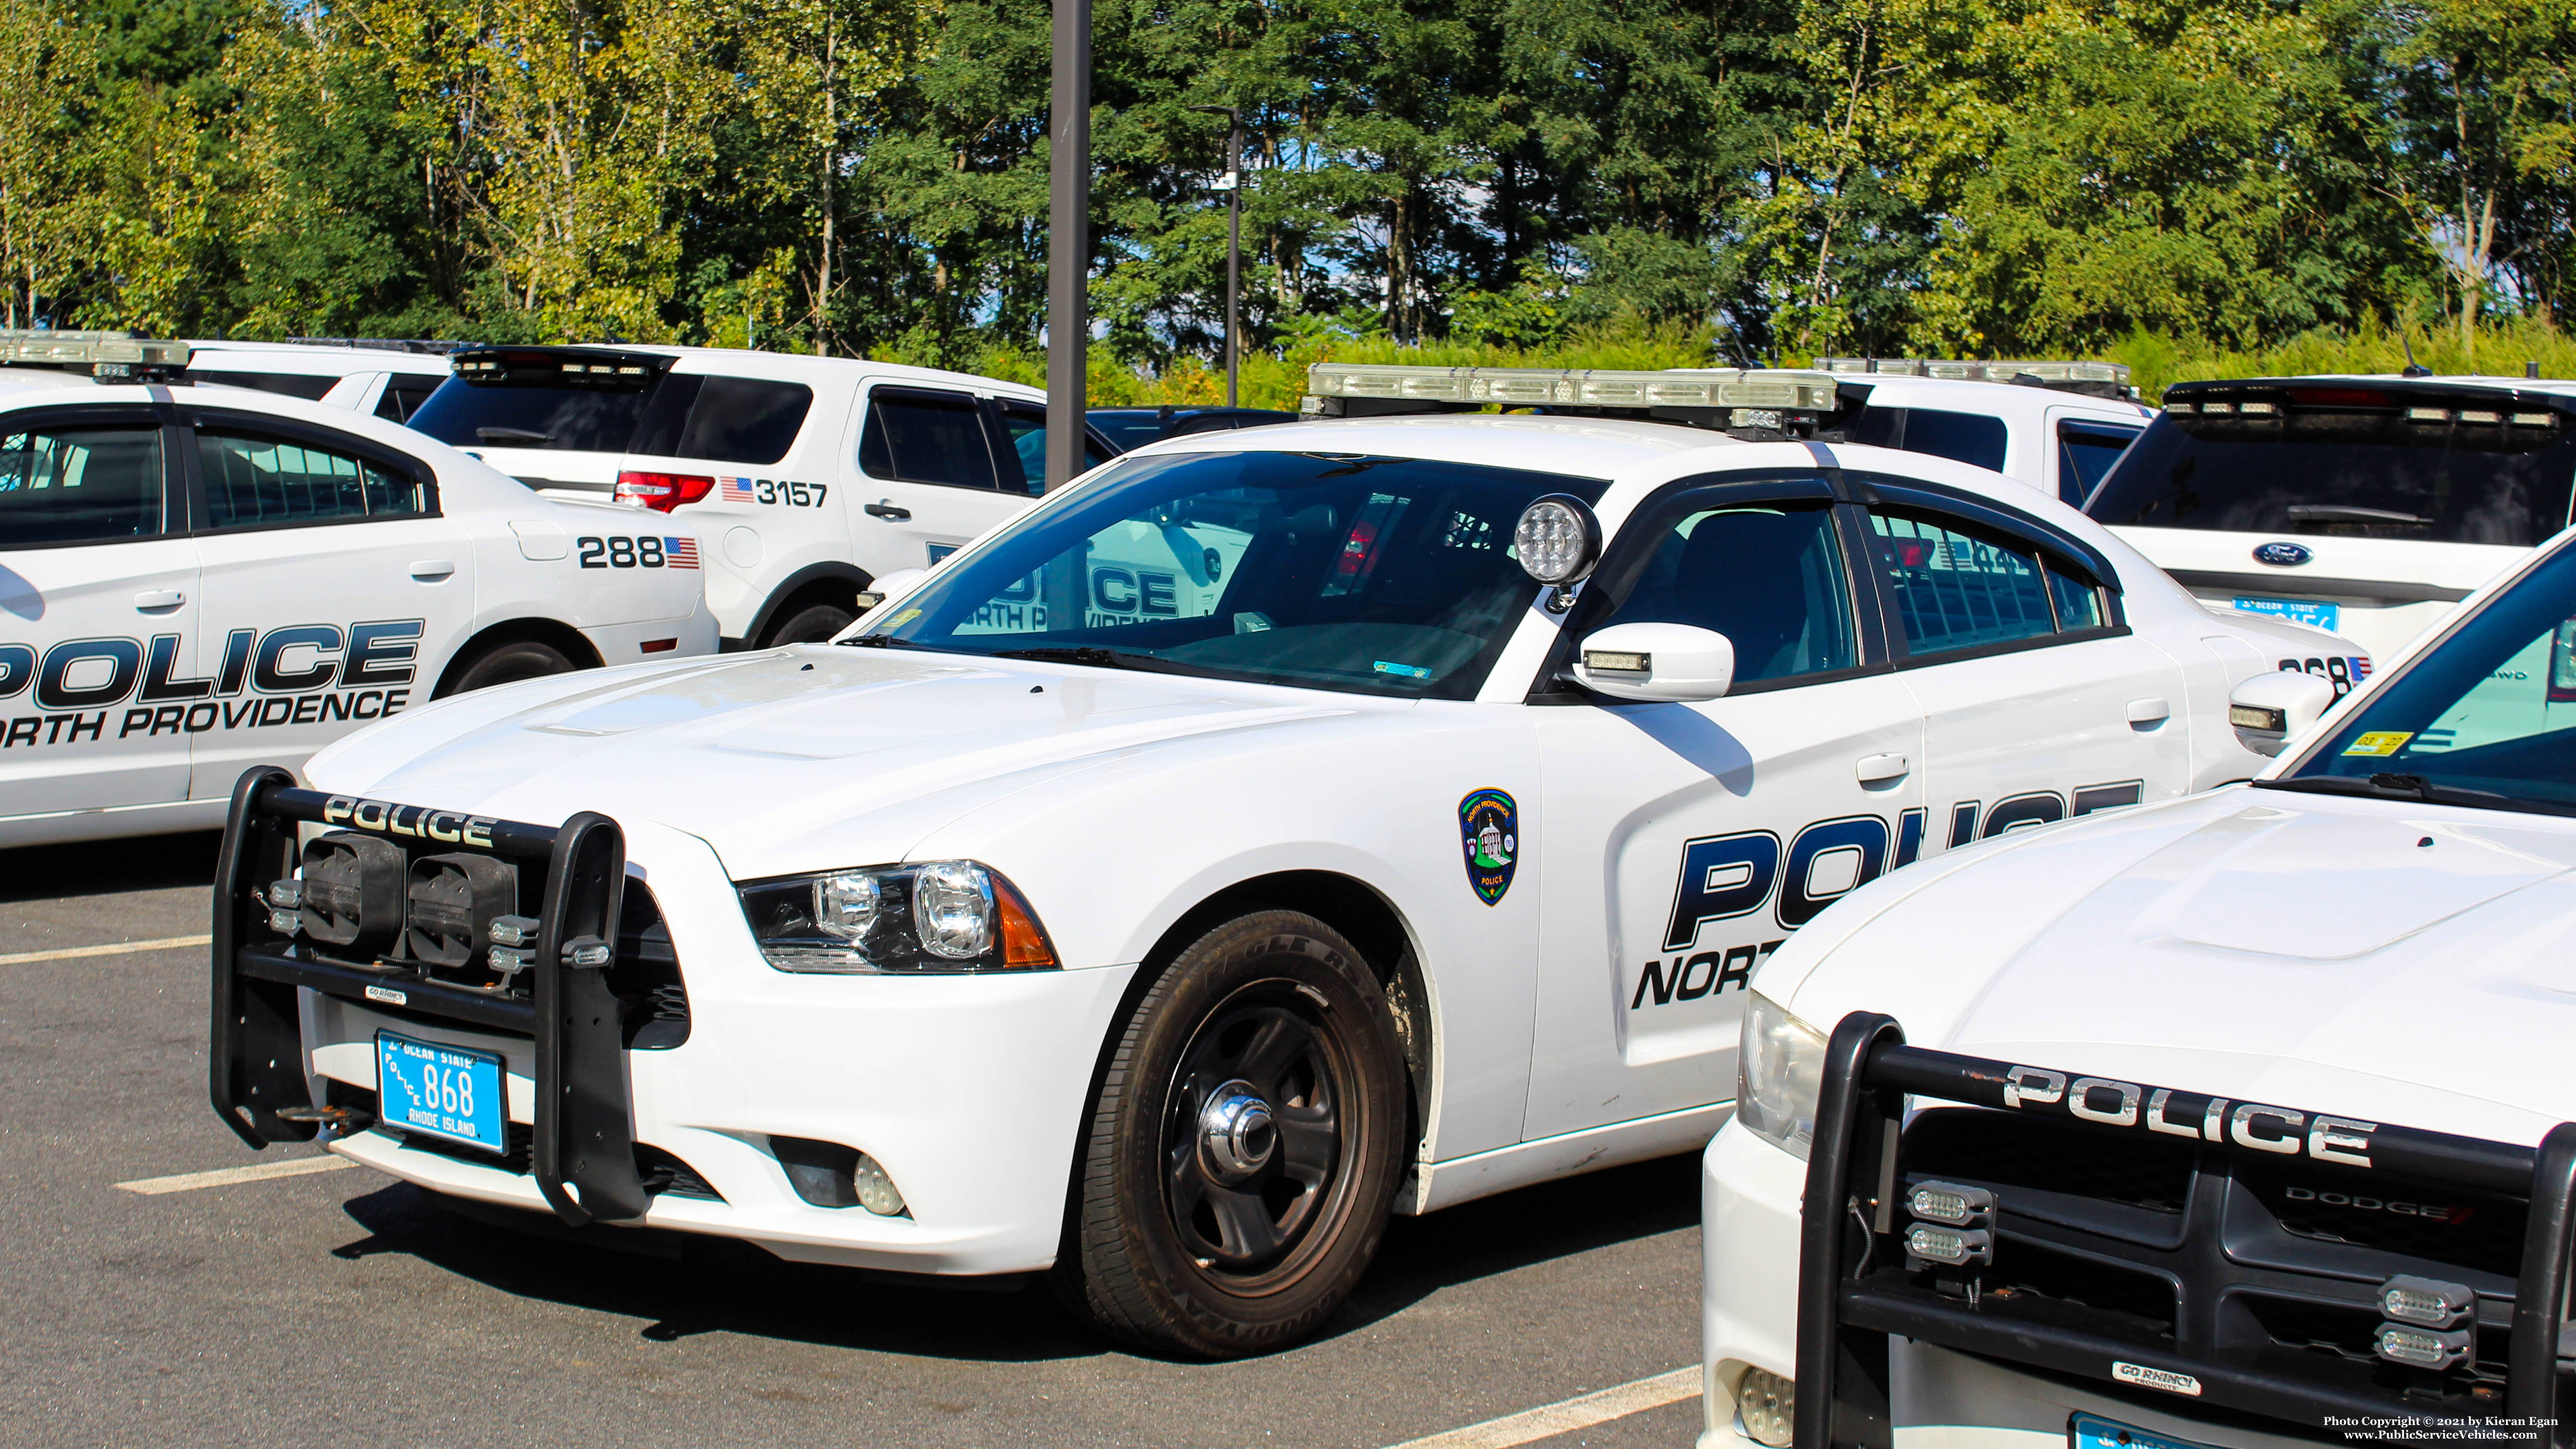 A photo  of North Providence Police
            Cruiser 868, a 2013 Dodge Charger             taken by Kieran Egan